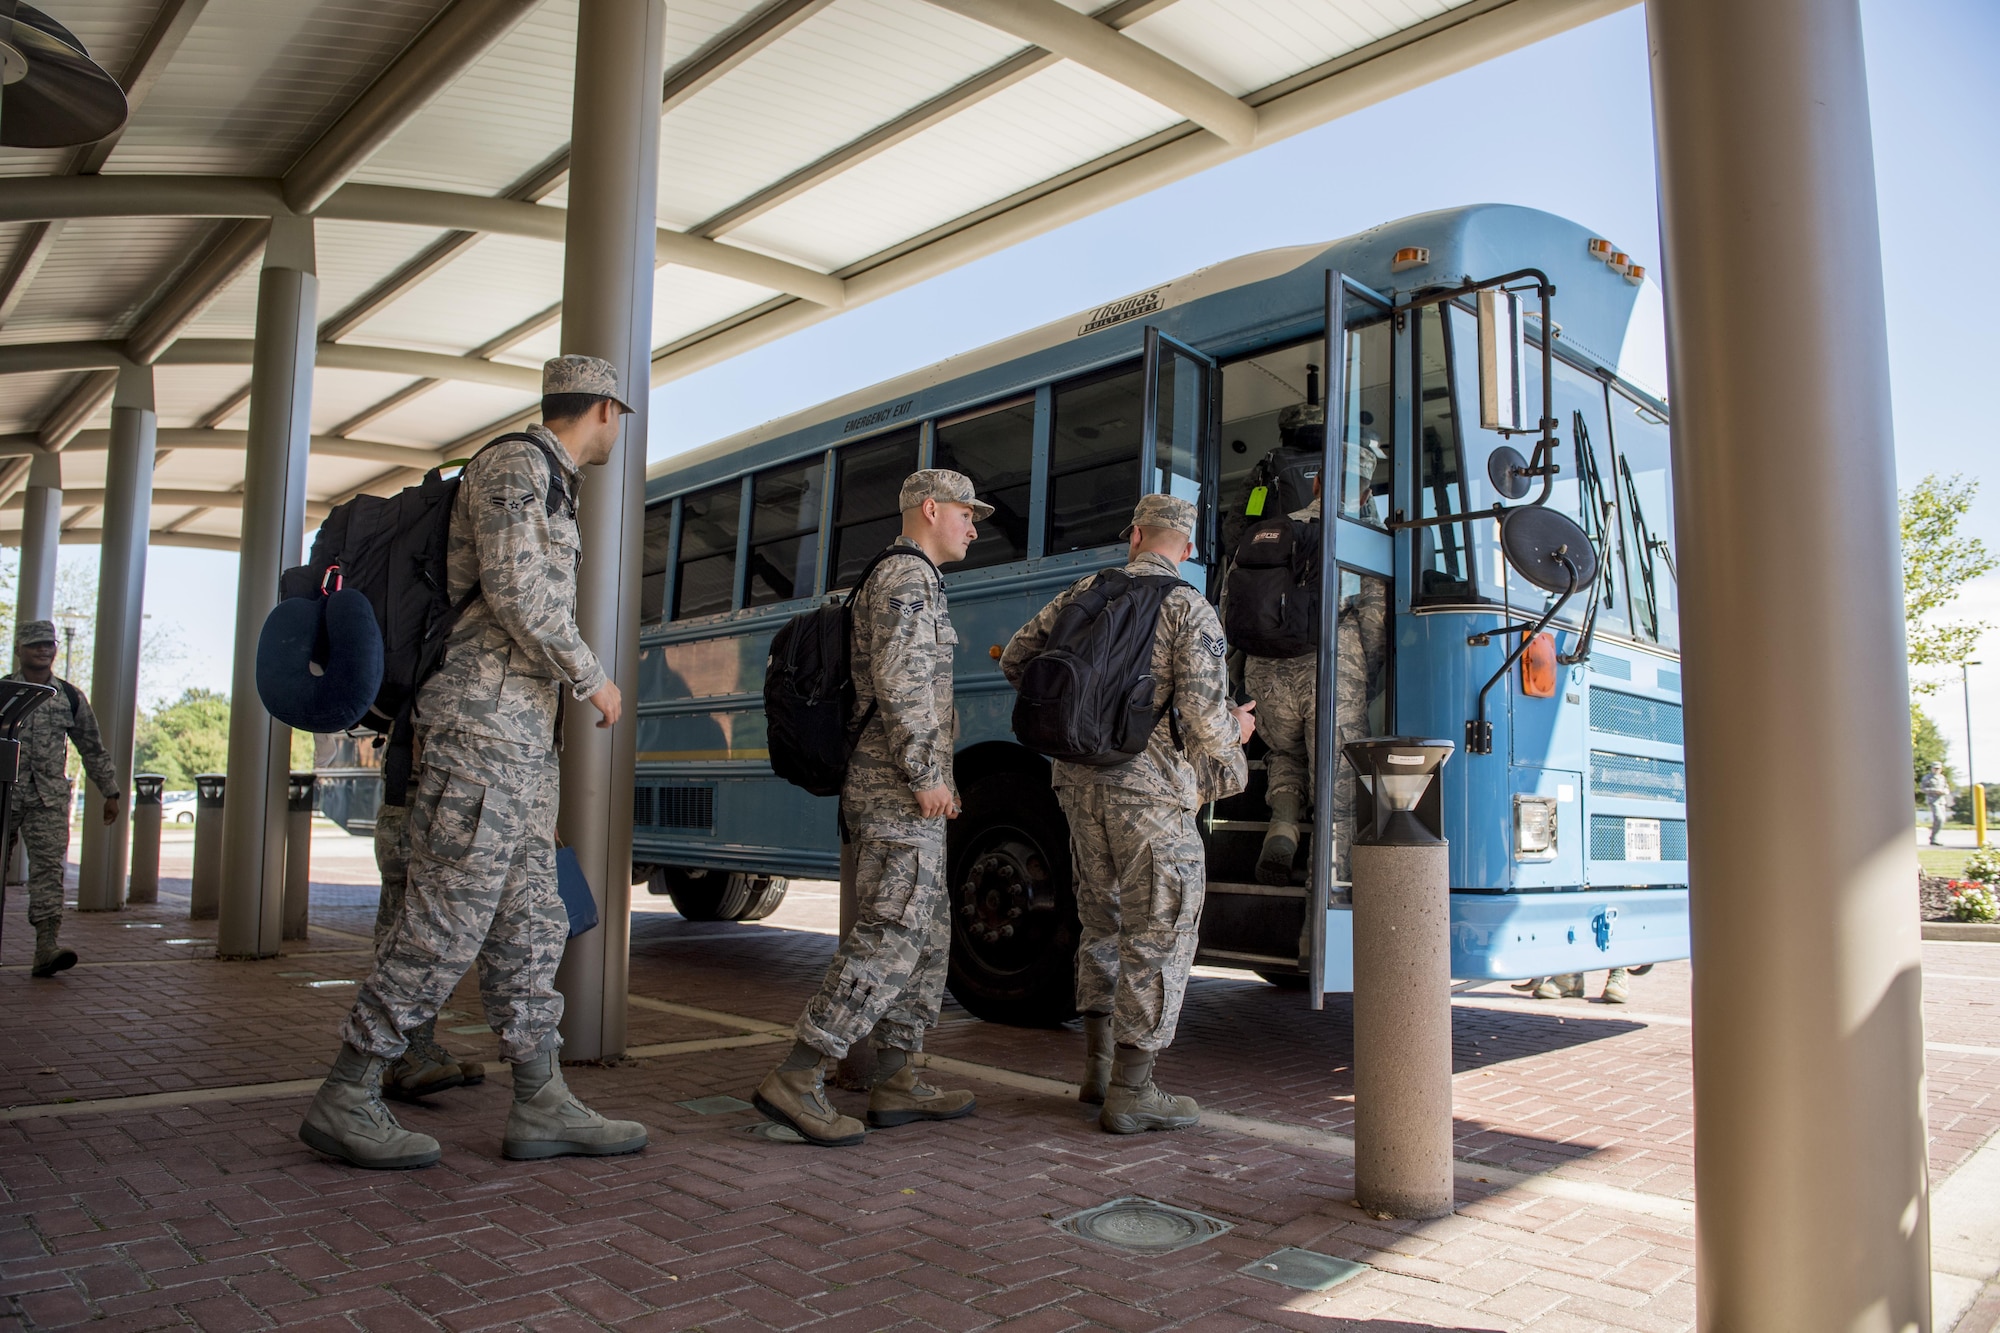 Airmen assigned to the 633rd Medical Group load a bus heading to the passenger terminal to deploy to provide aid to Puerto Rico from Joint Base Langley-Eustis, Va., Oct. 17, 2017. Approximately 90 JB Langley-Eustis Airmen deployed as a global response force to provide expeditionary medical care to Puerto Rico residents. (U.S. Air Force photo by Tech. Sgt. Rasheen Douglas)